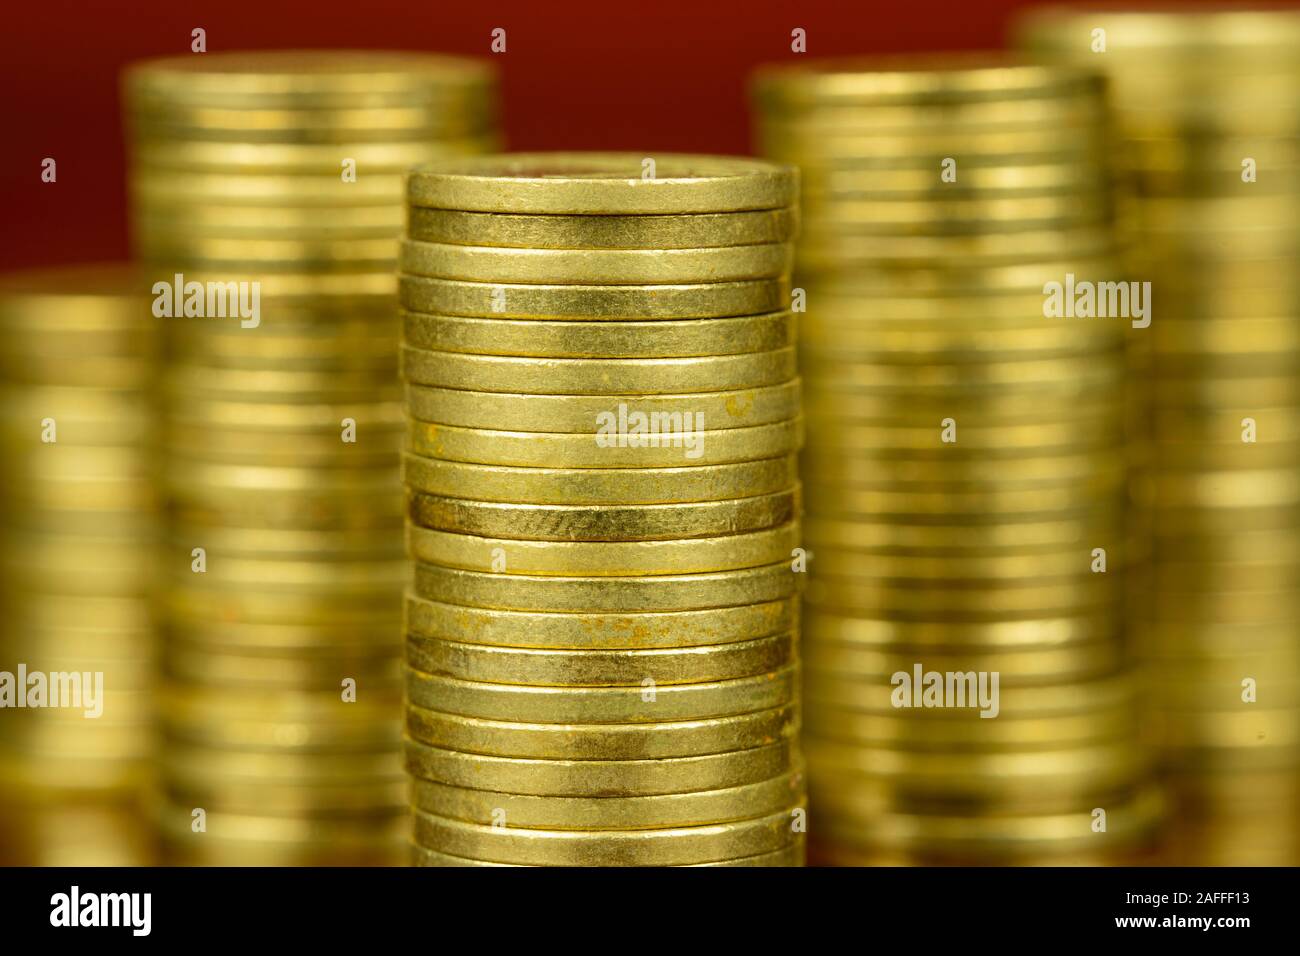 Shiny stack of golden coins. Close up photo. Business concept. Reflection on the table. Red background. Stock Photo